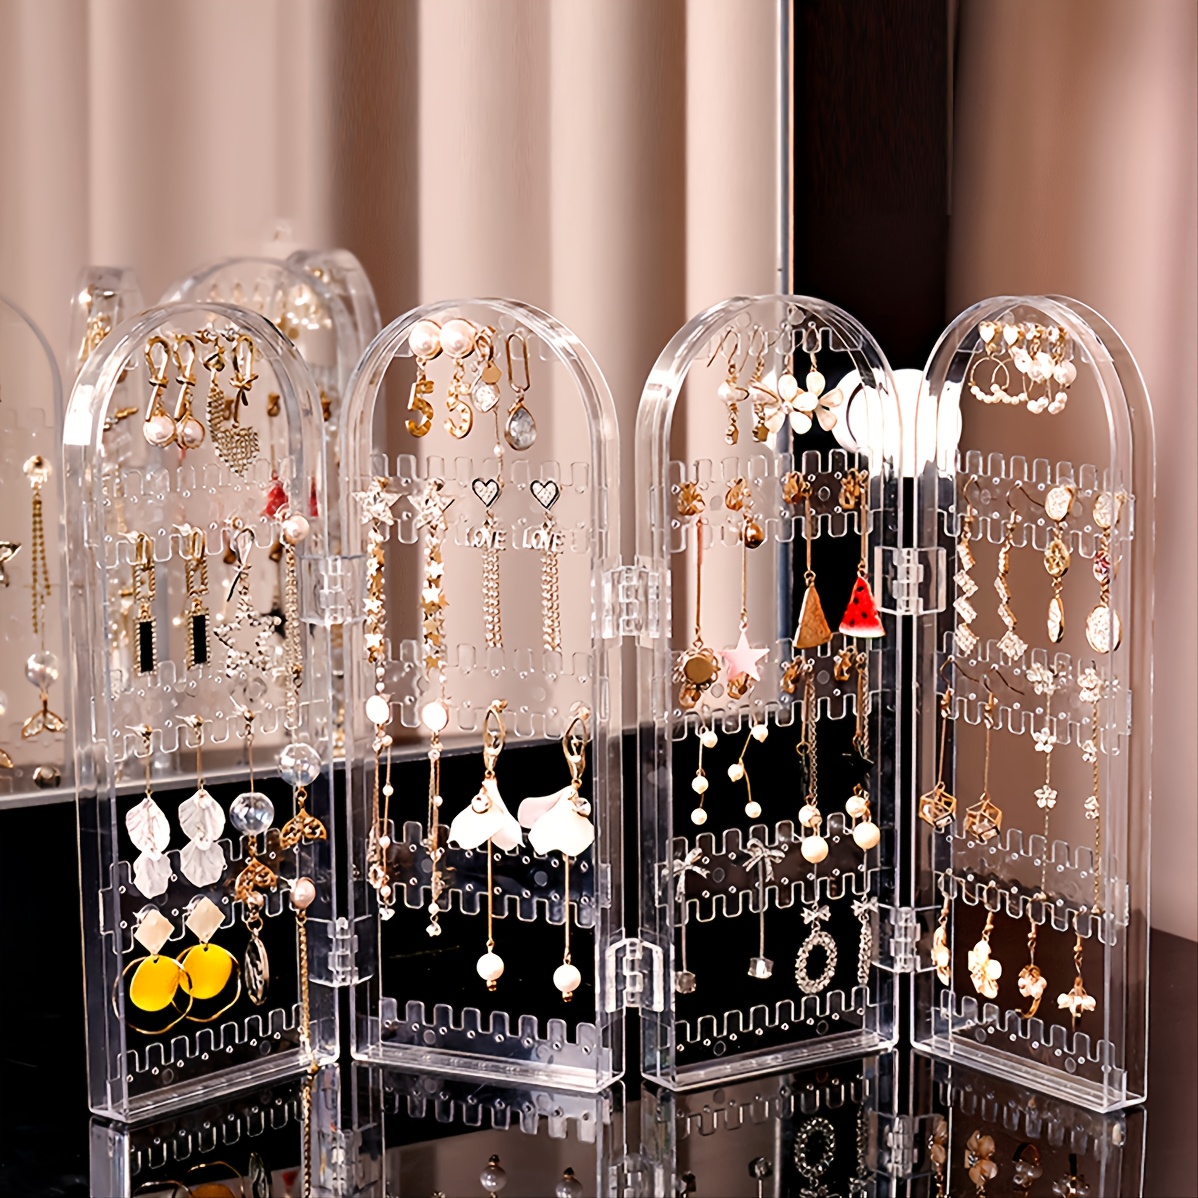 Acrylic Earring Display OrganizerFoldable Necklace Hanging Jewelry  StandDouble Sided Jewellery Hanger Organiser for  StudsJhumkasChainsBracelets180 Holes 90 Pairs of Earrings